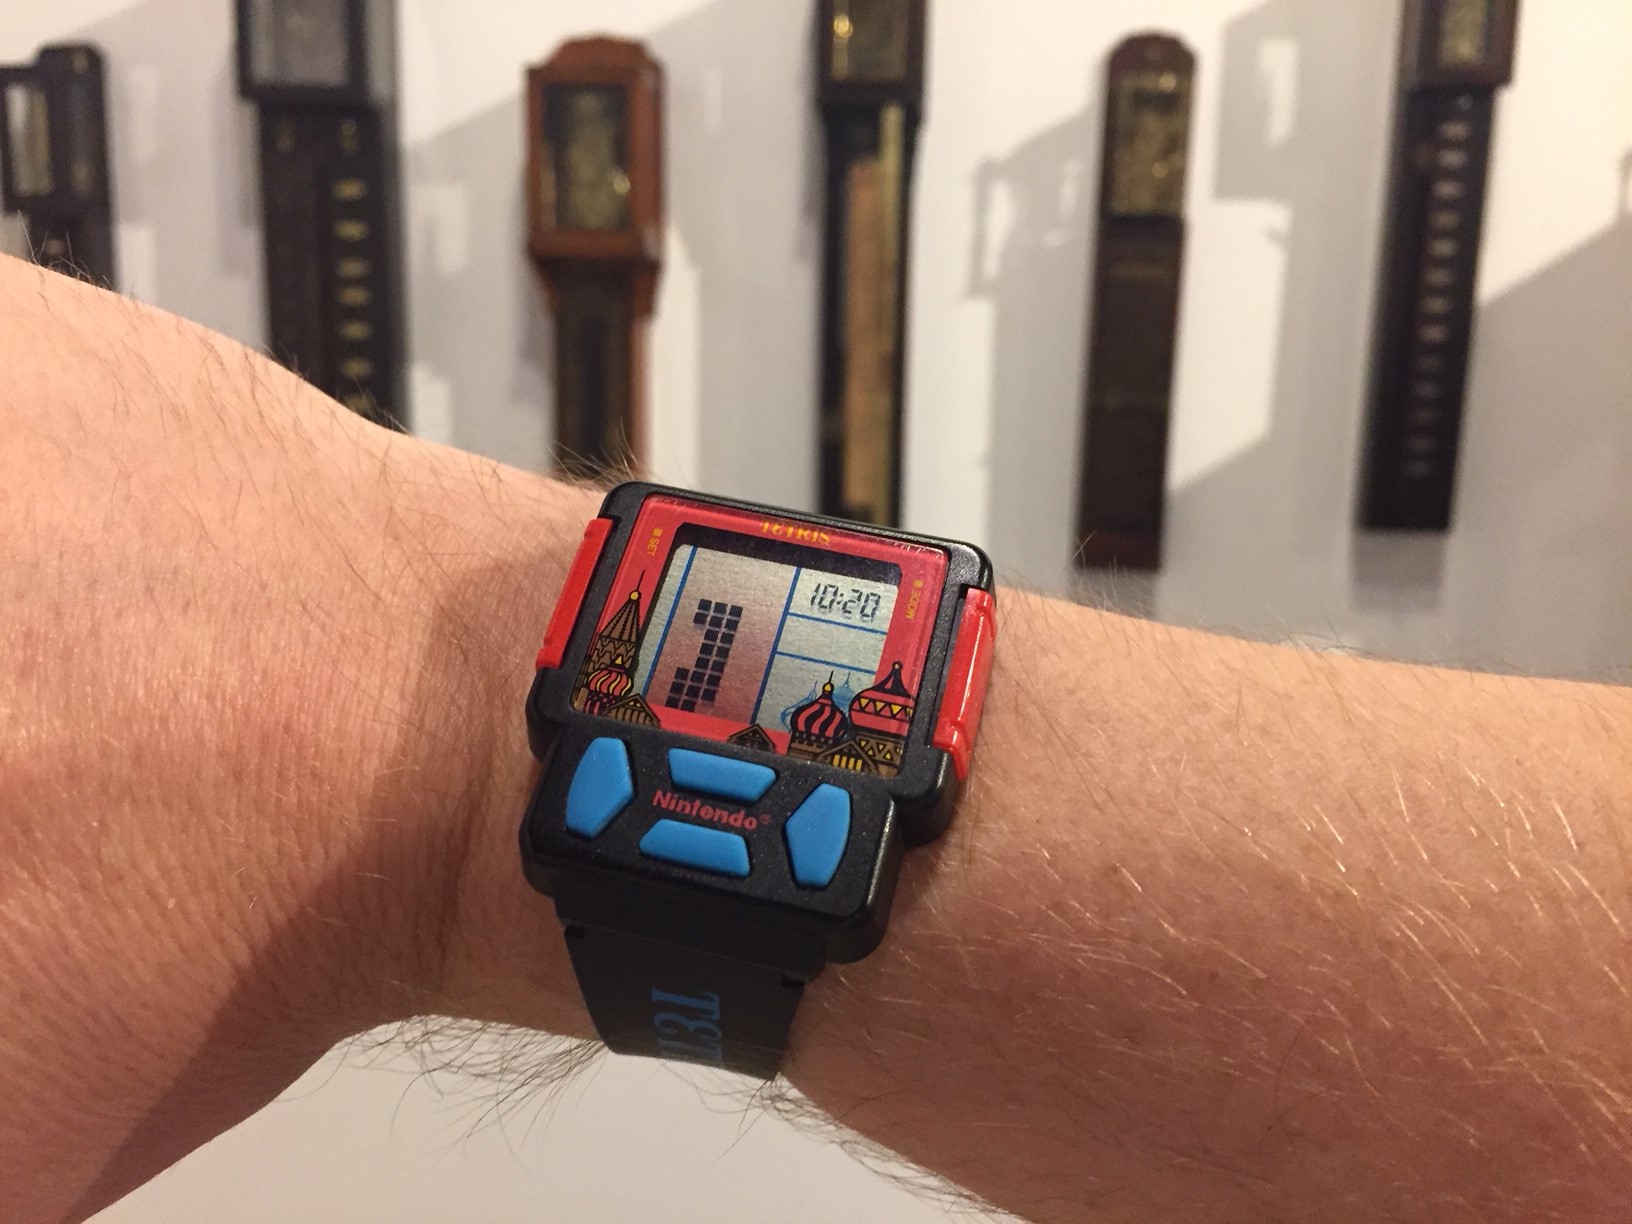 Tetris watch on man's wrist with Japanese shaku-dokei clock display in background at the National Watch & Clock Museum